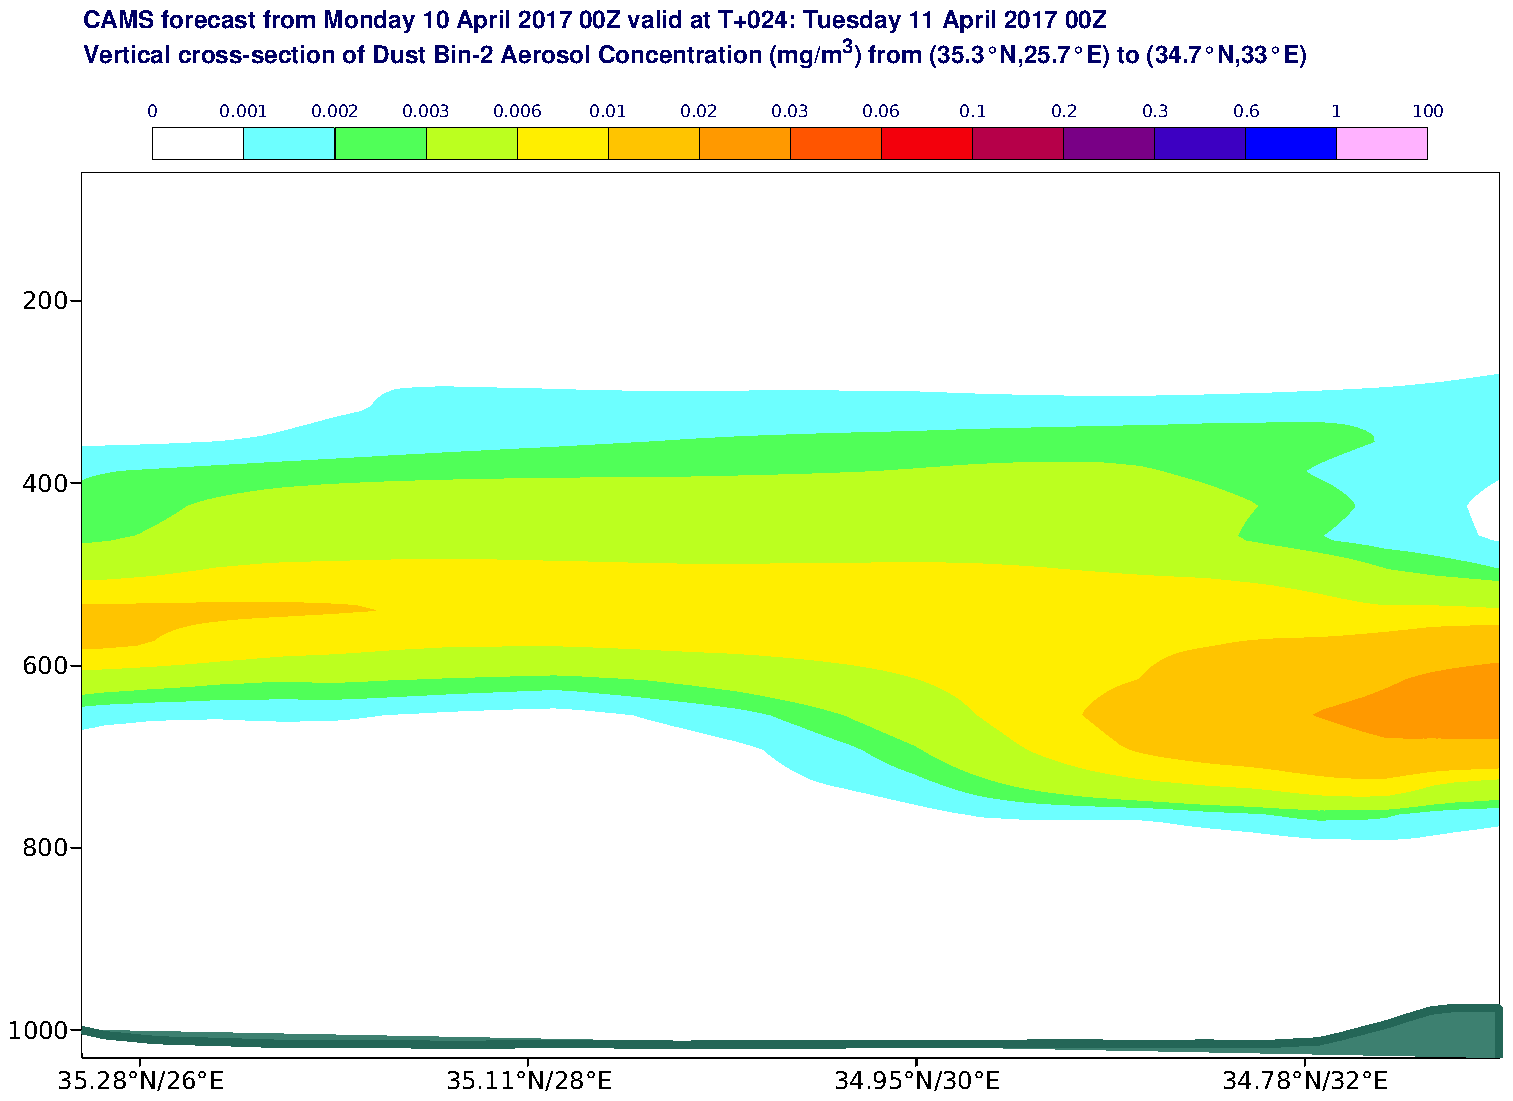 Vertical cross-section of Dust Bin-2 Aerosol Concentration (mg/m3) valid at T24 - 2017-04-11 00:00